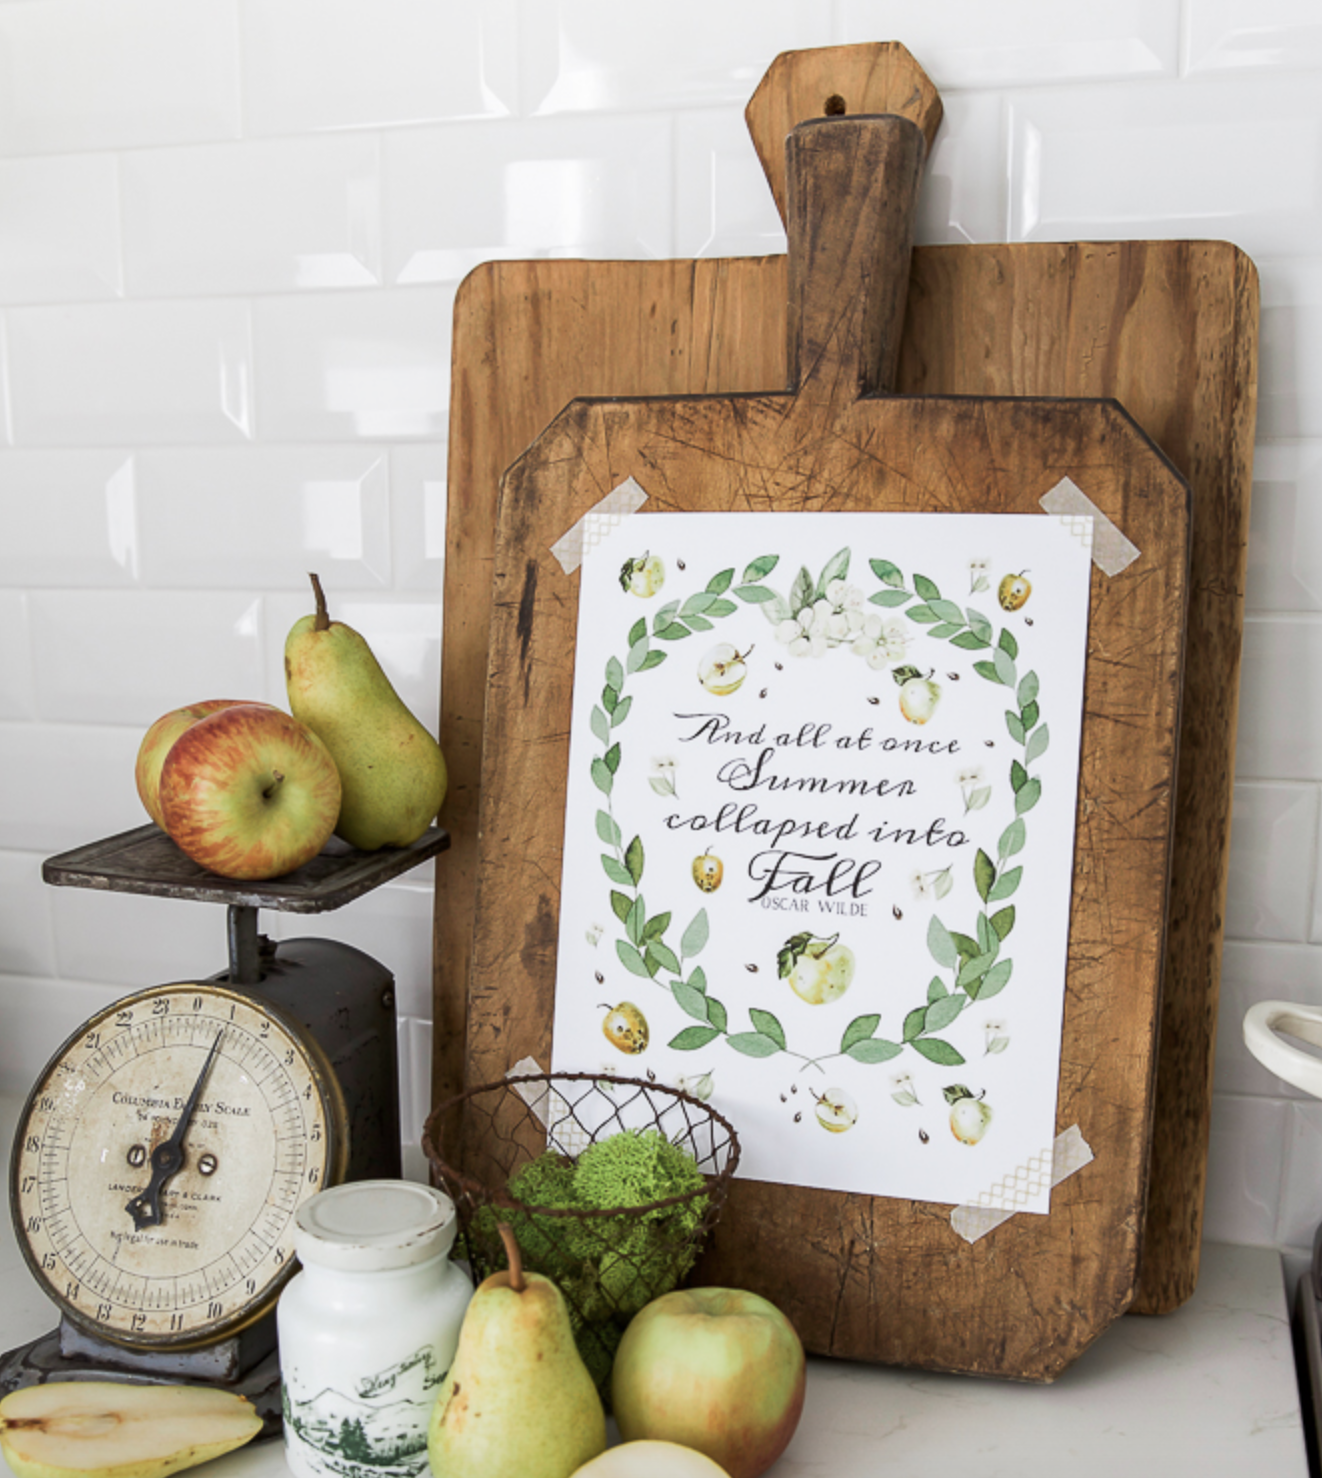 This adorable quote on the kitchen cutting boards is a sweet addition. 